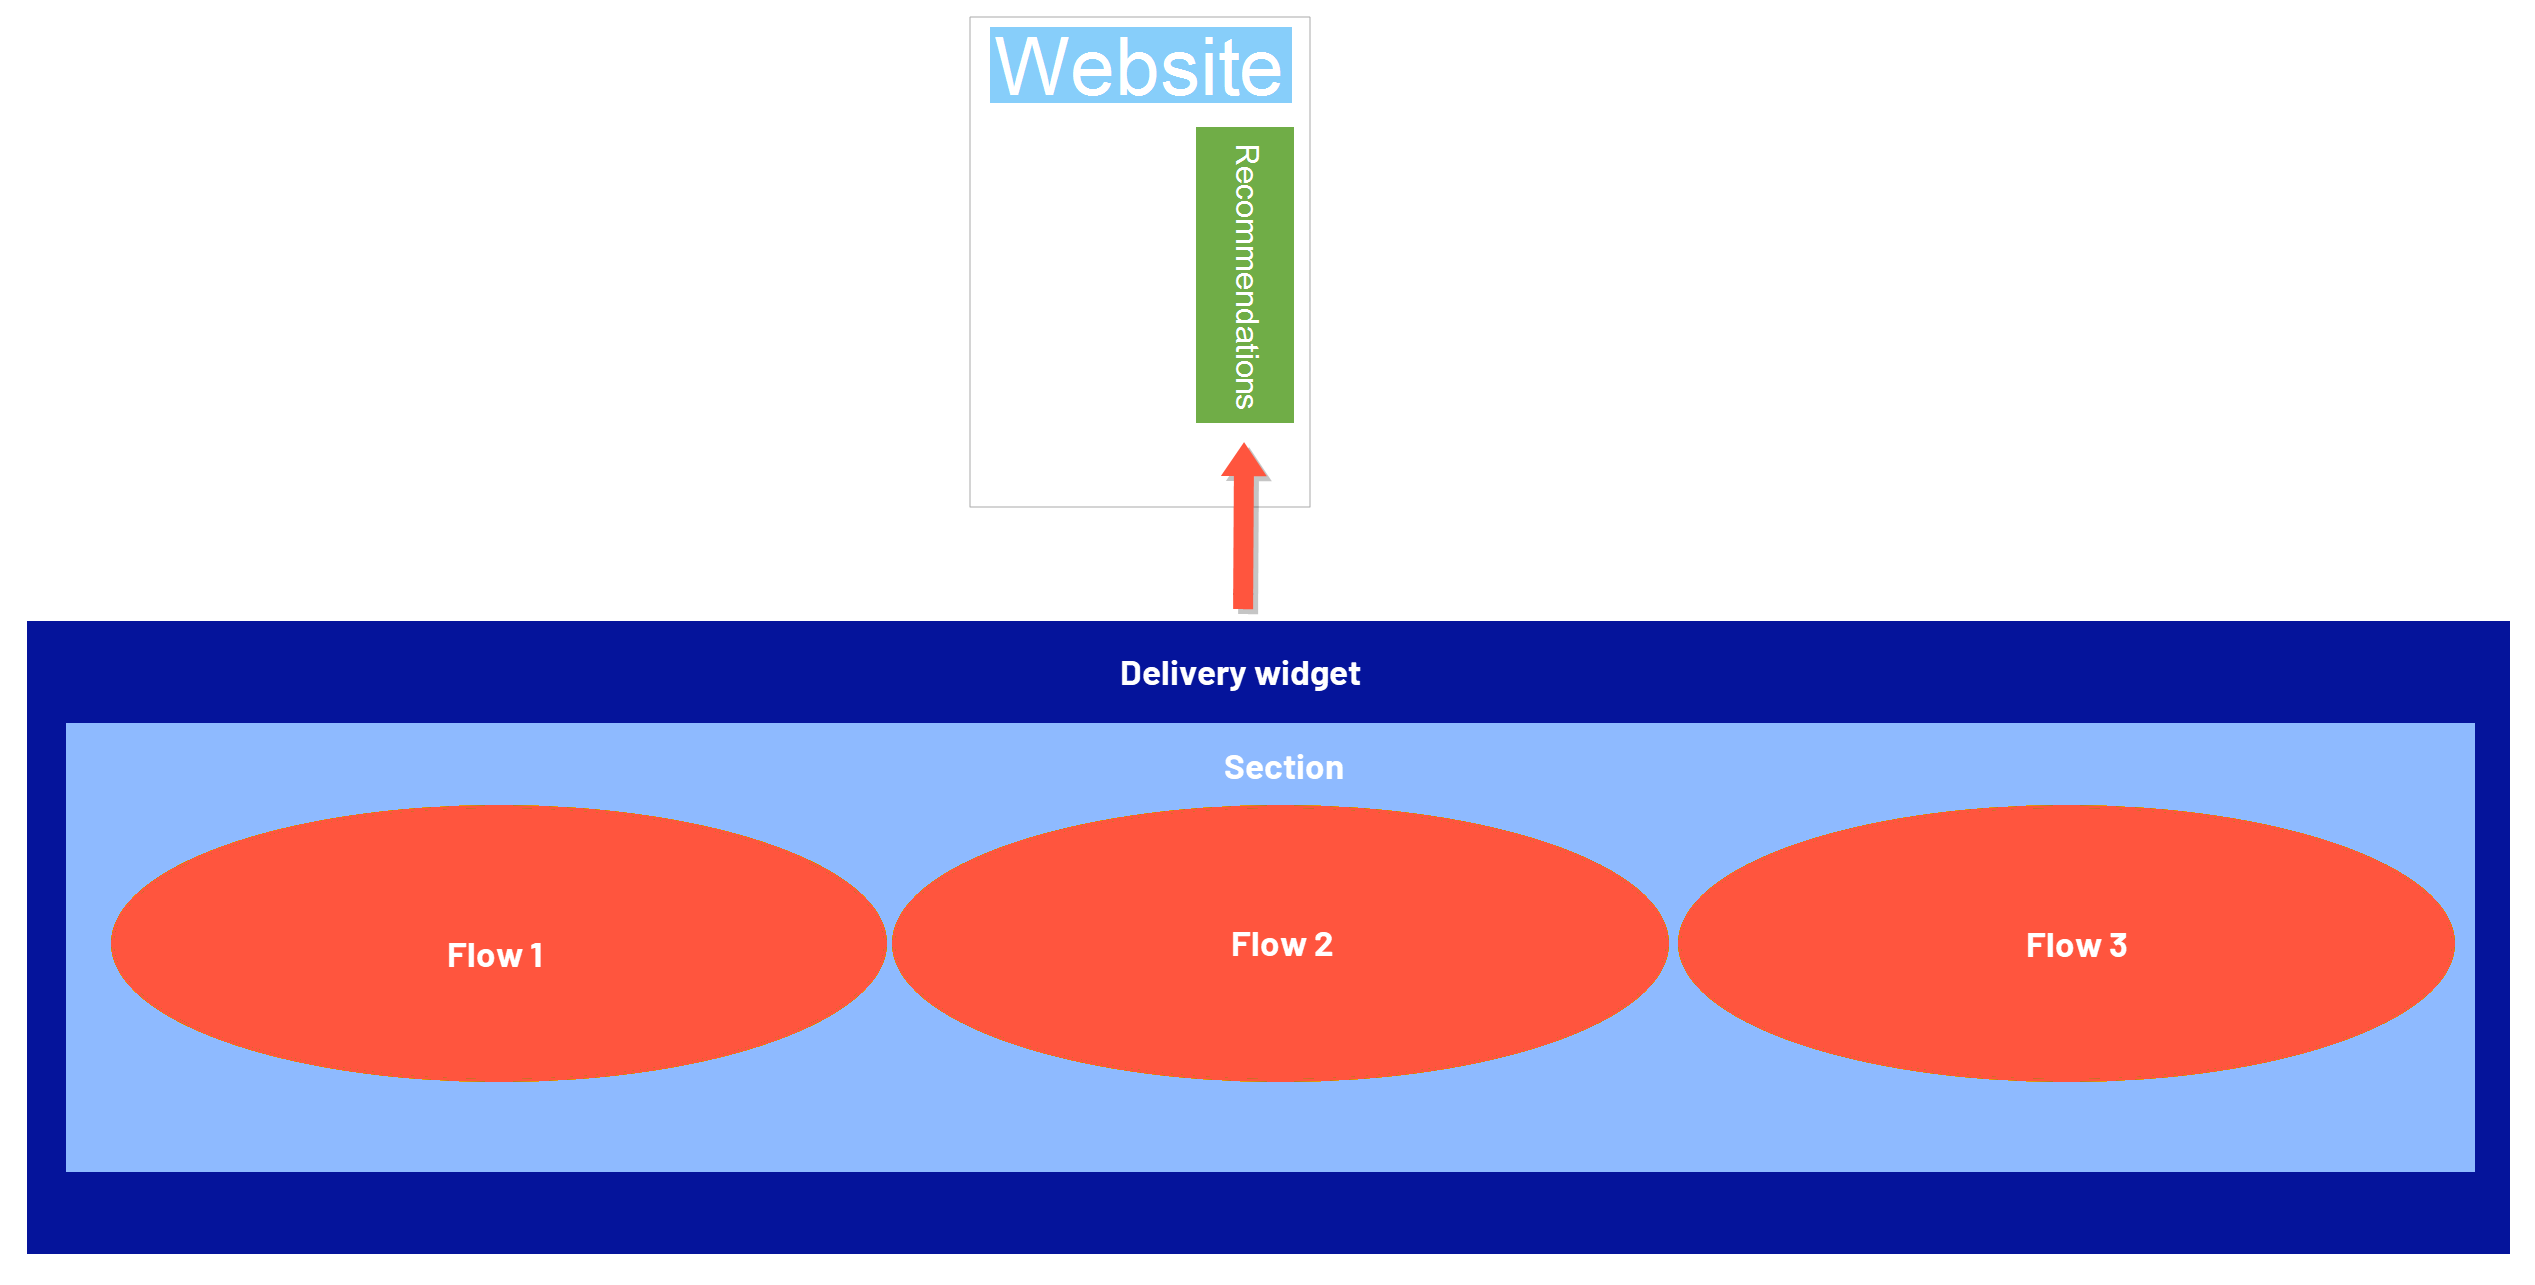 Image: Flows - Section - Delivery widget diagram